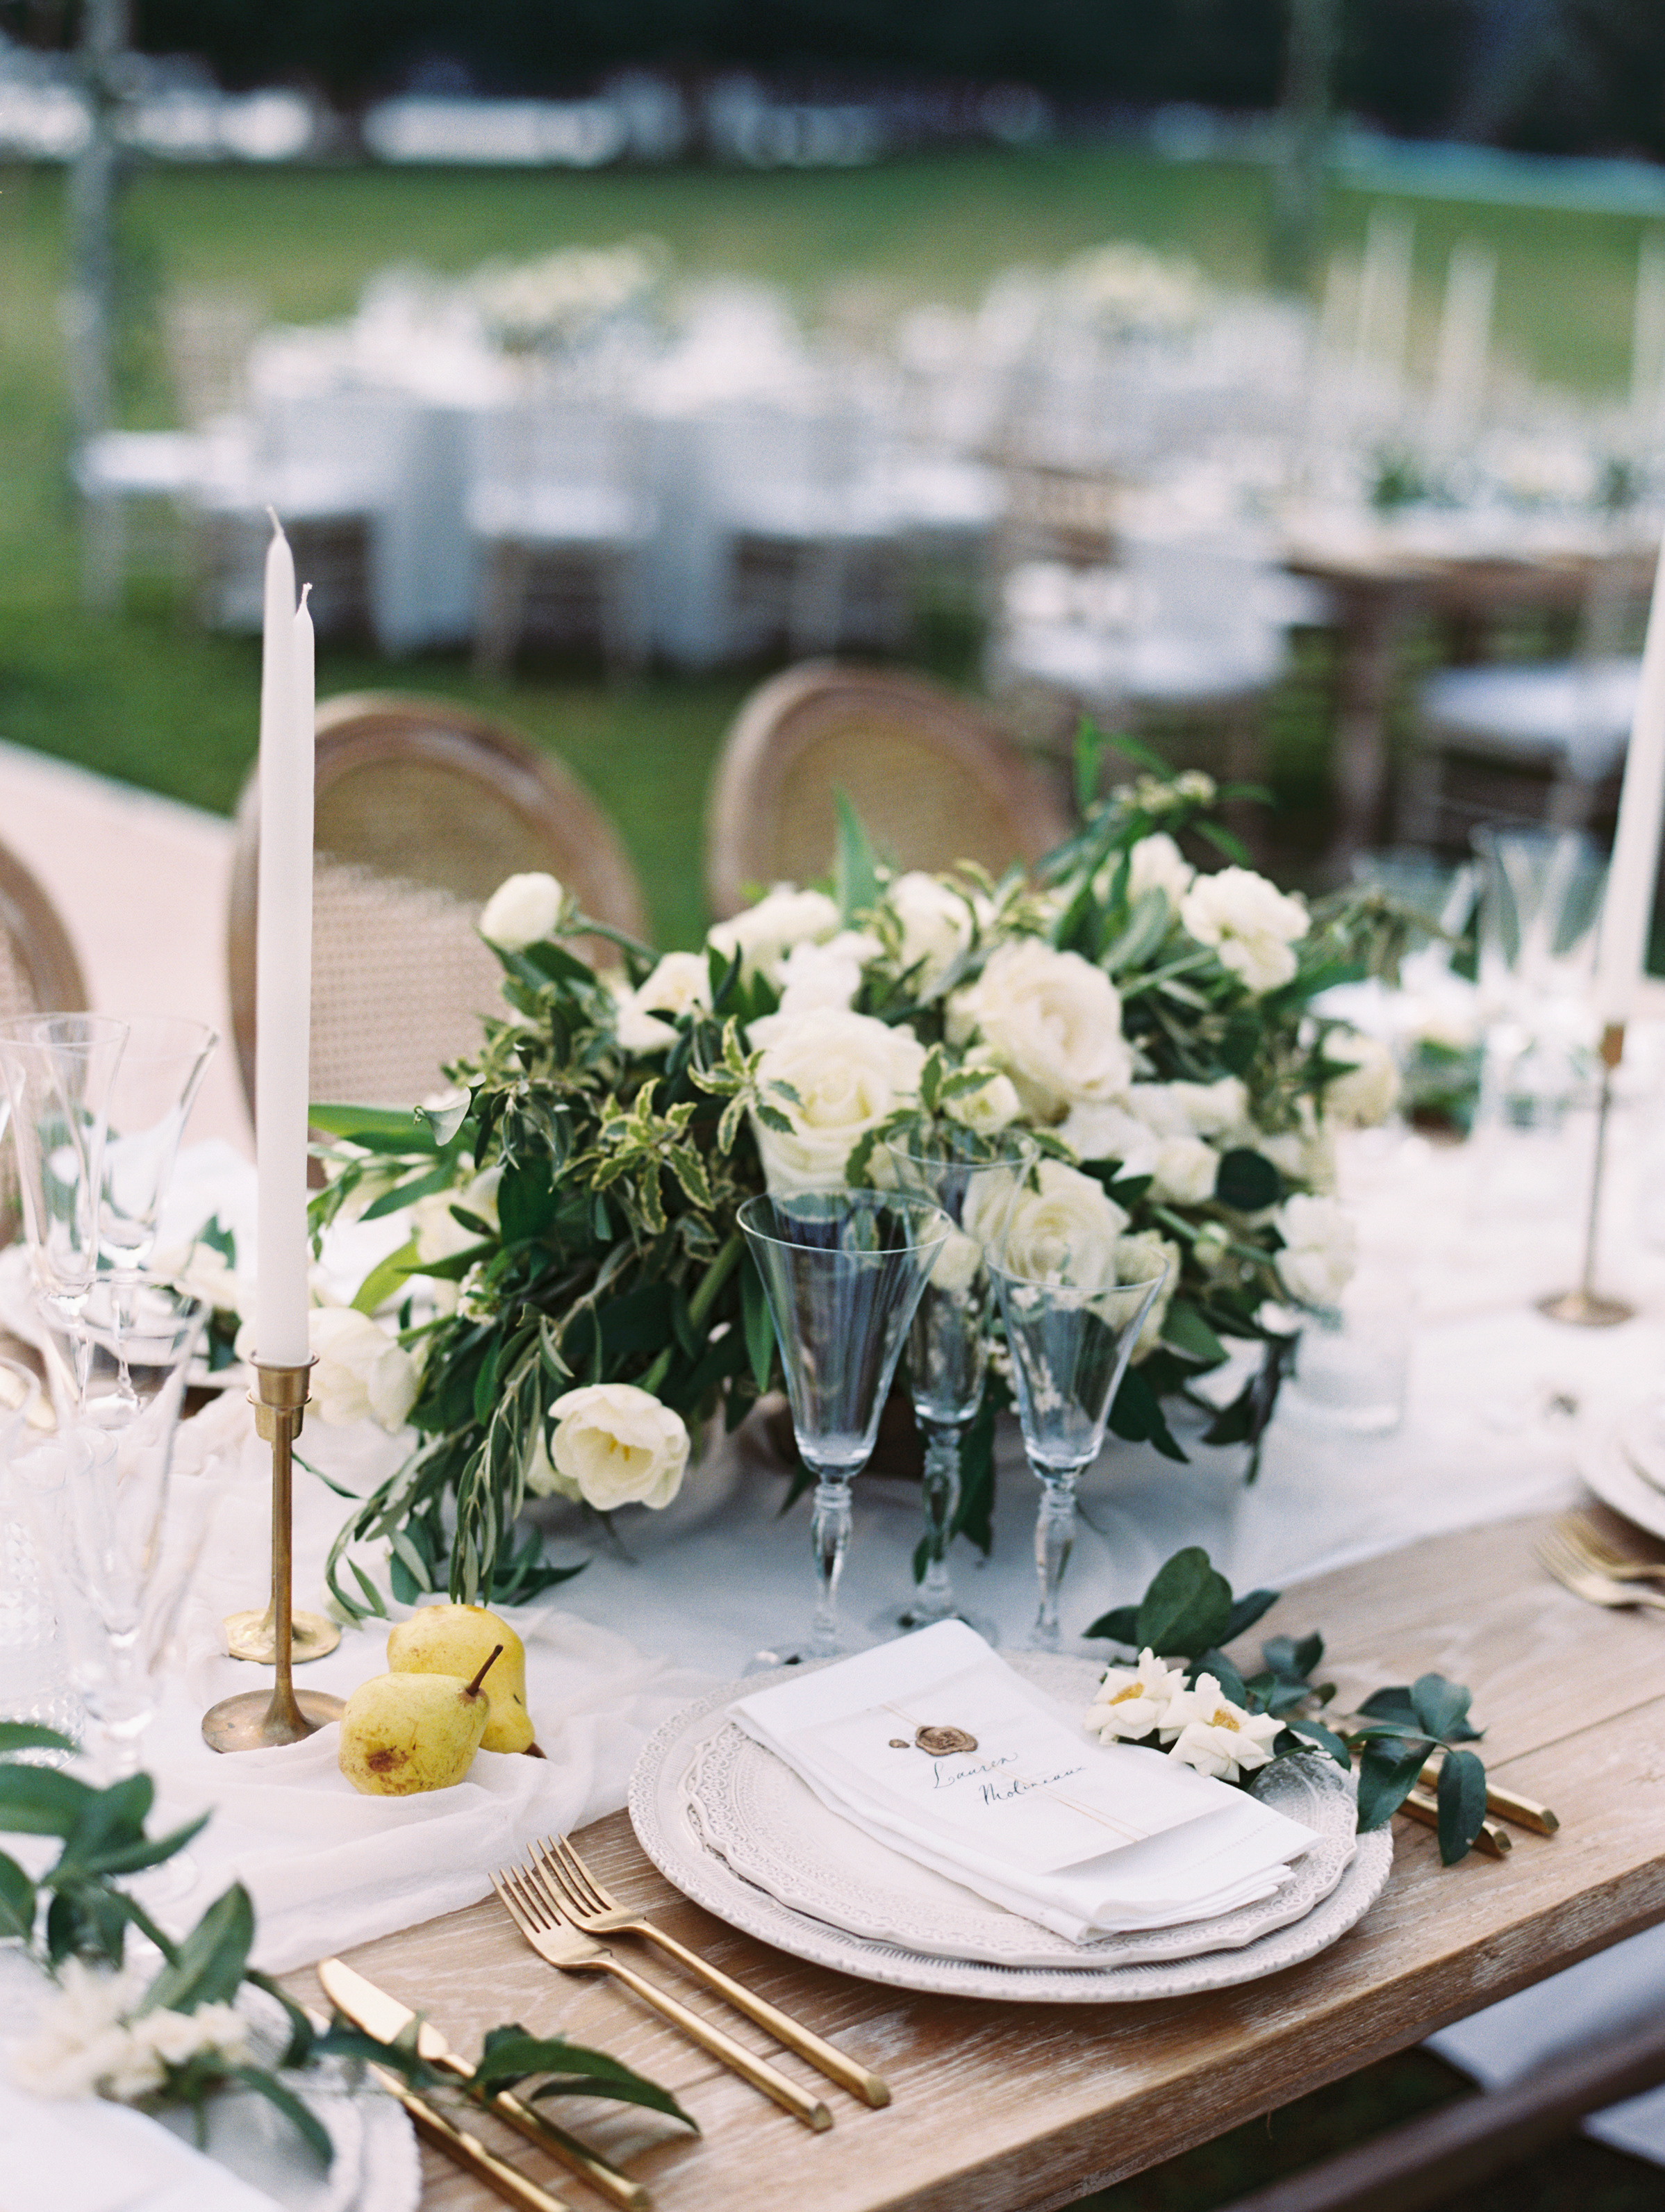 Photography: Lisa Ziesing with Abby Jiu Photography | Planning & Styling: Lauryn Prattes Styling and Events | Handmade Paper & Calligraphy: Spurlé Gul Studio | Florals: Sweet Root Village